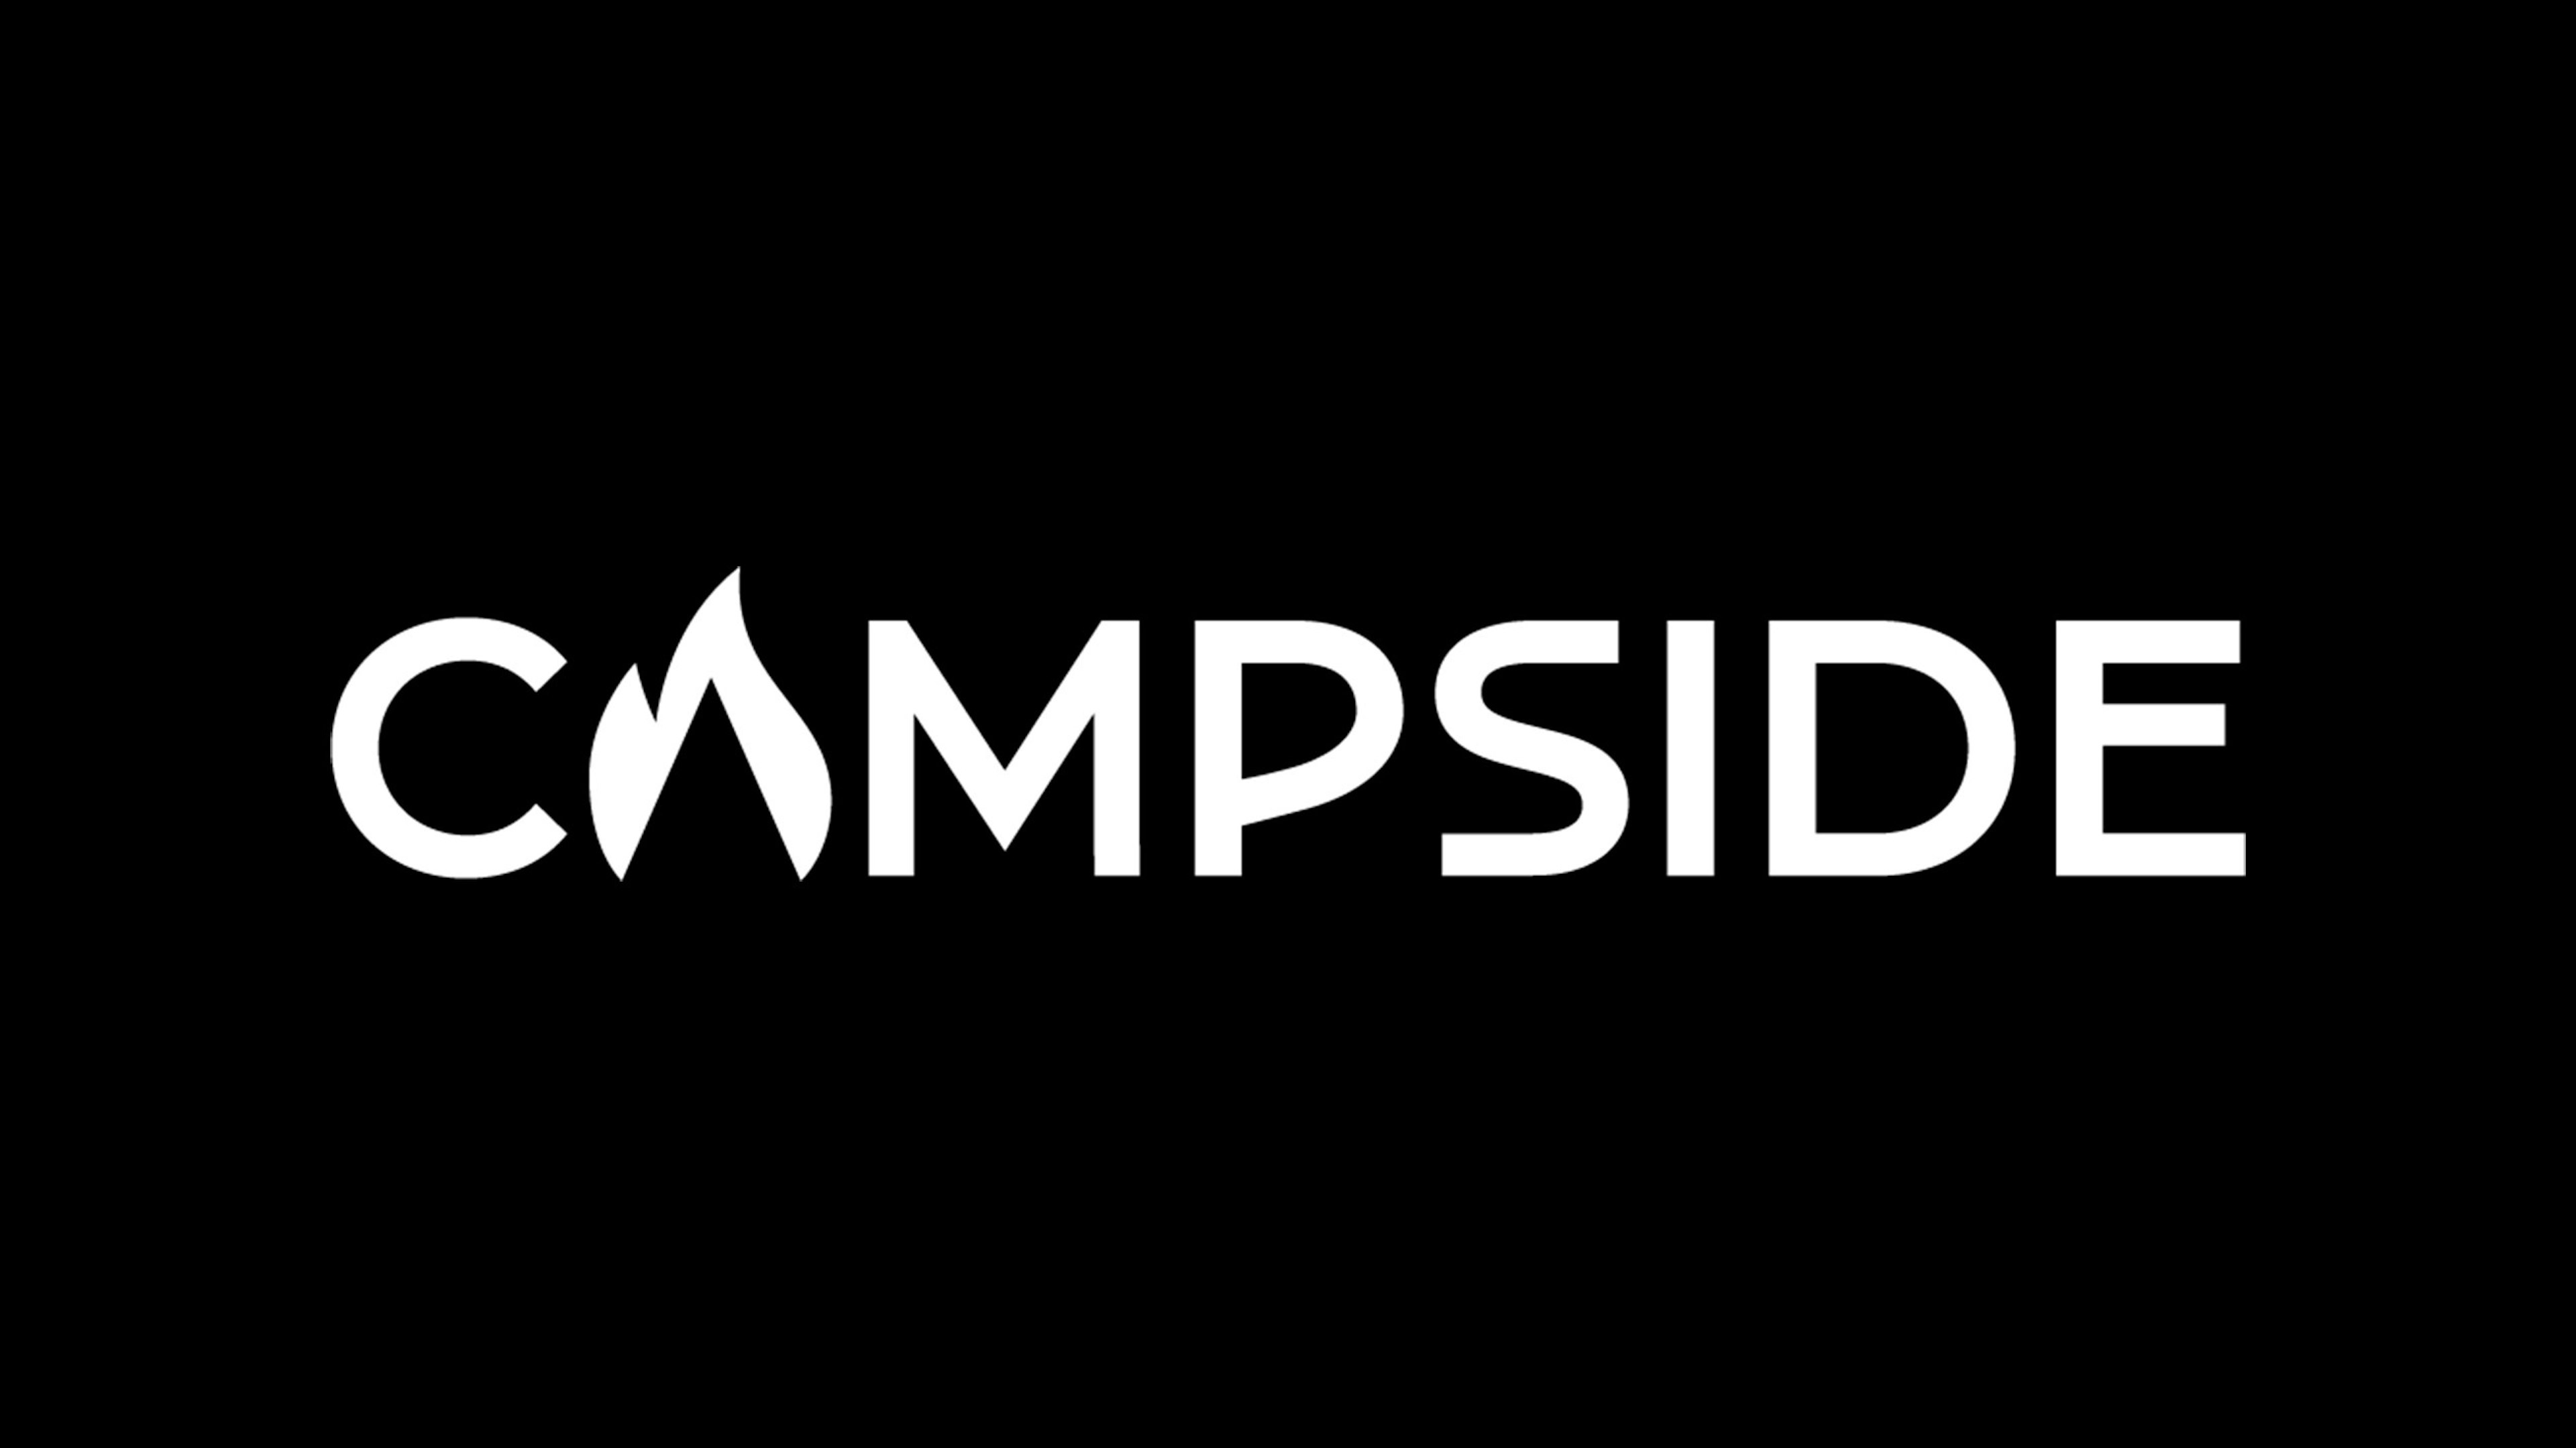 Black background with "Campside" in white in the middle. The A is in the shape of a fire.